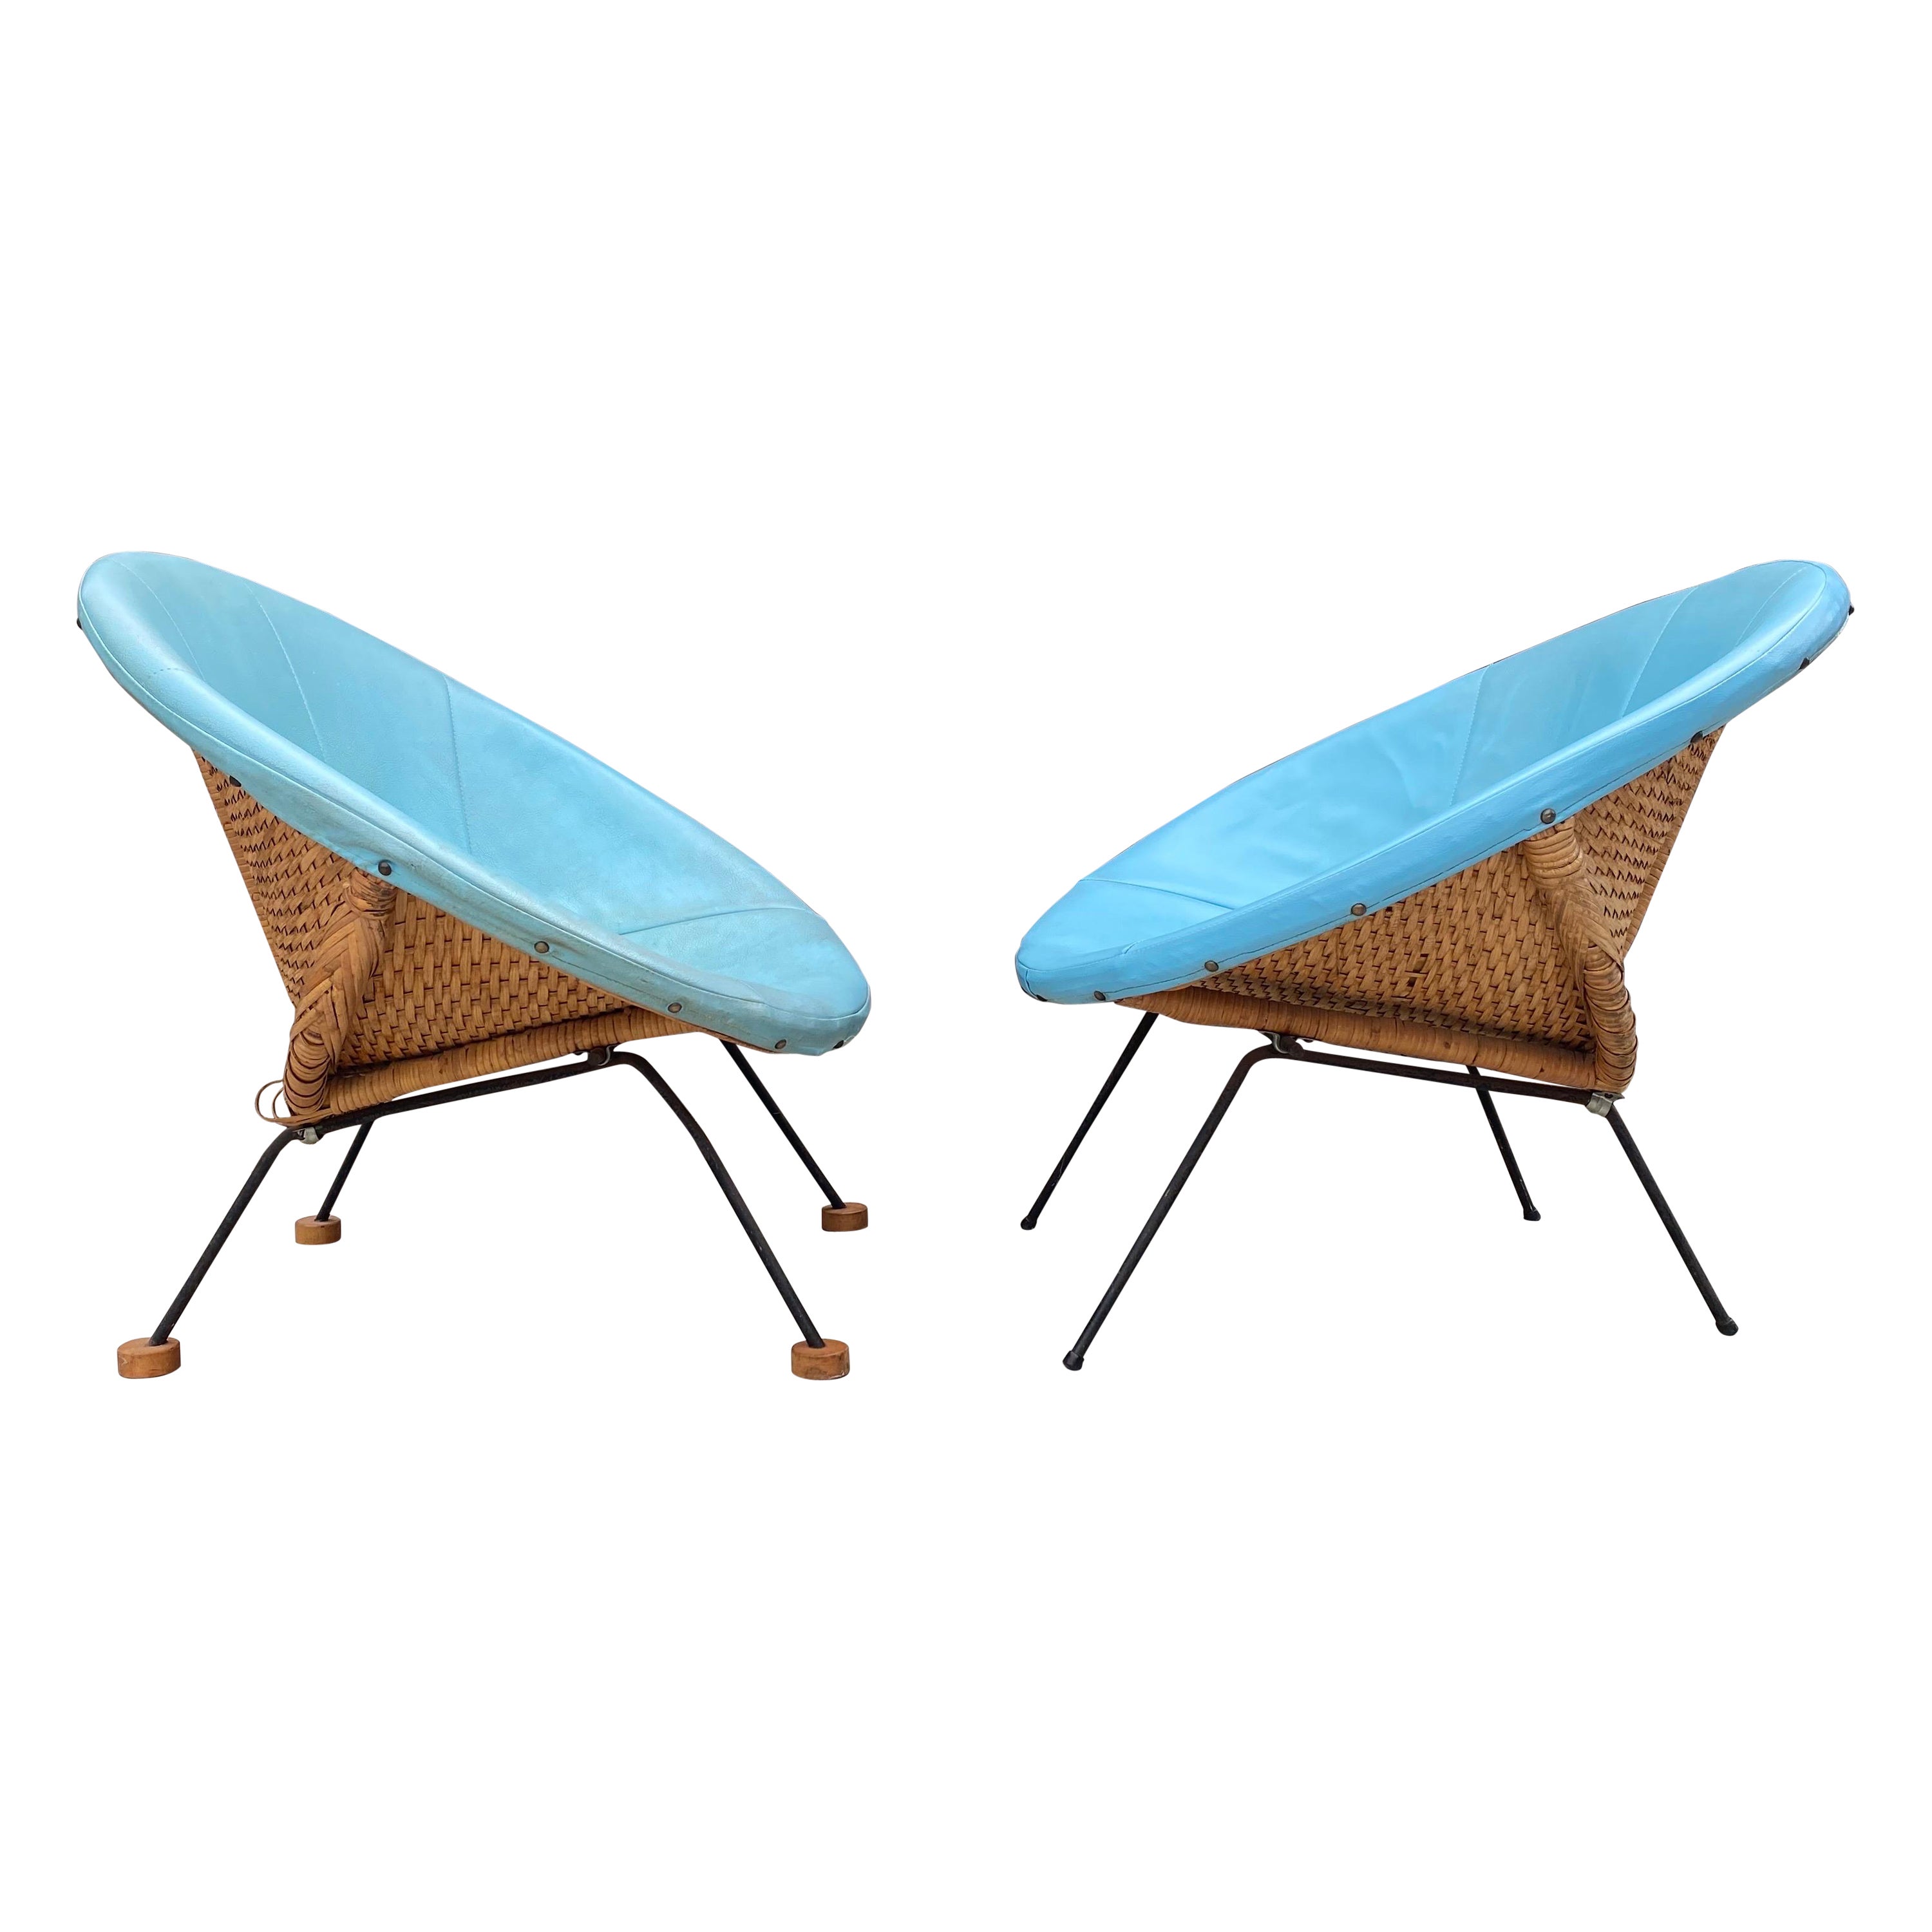 Mid-Century Modern Boho Chic Turquoise Rattan Scoop Chairs, a Pair